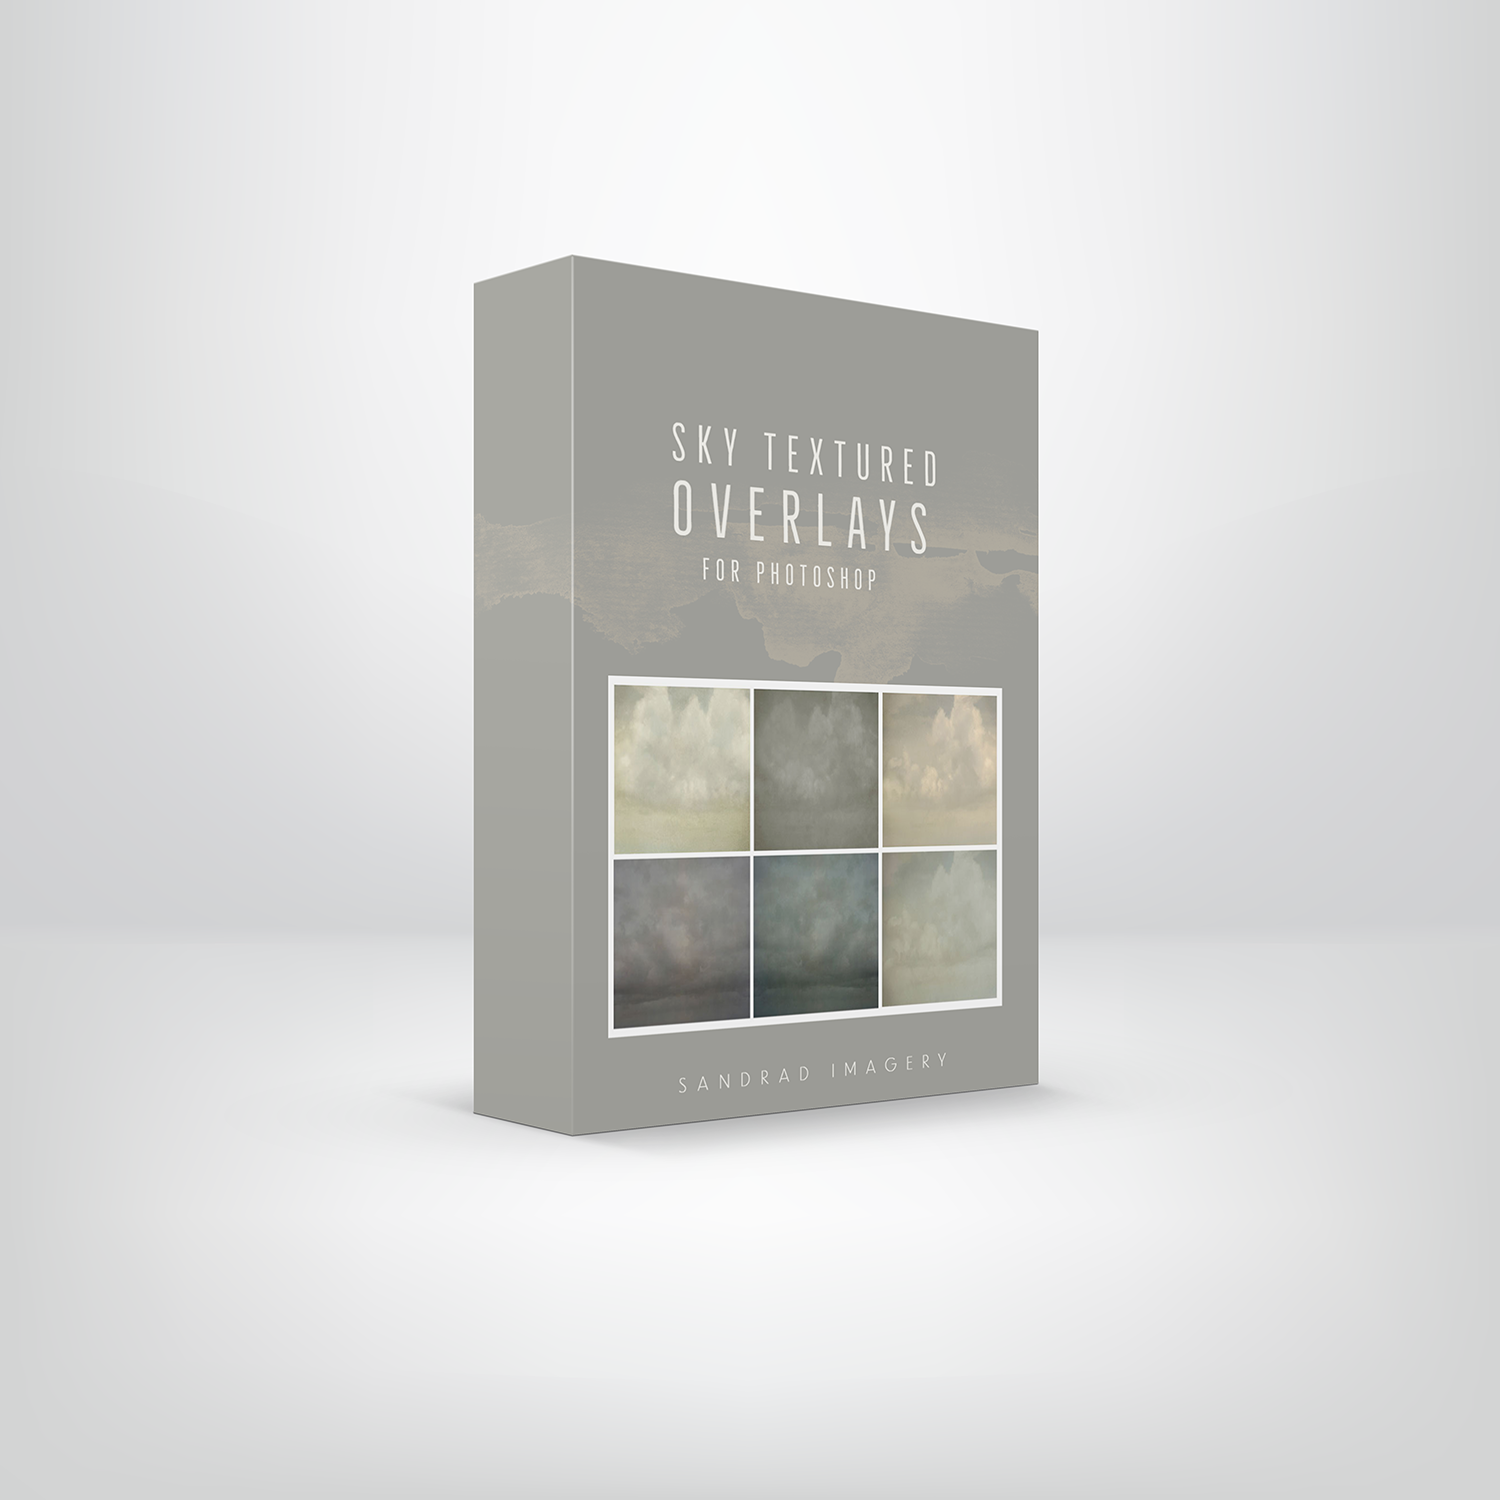 Sky Textures Overlays for Photoshop Cover.png